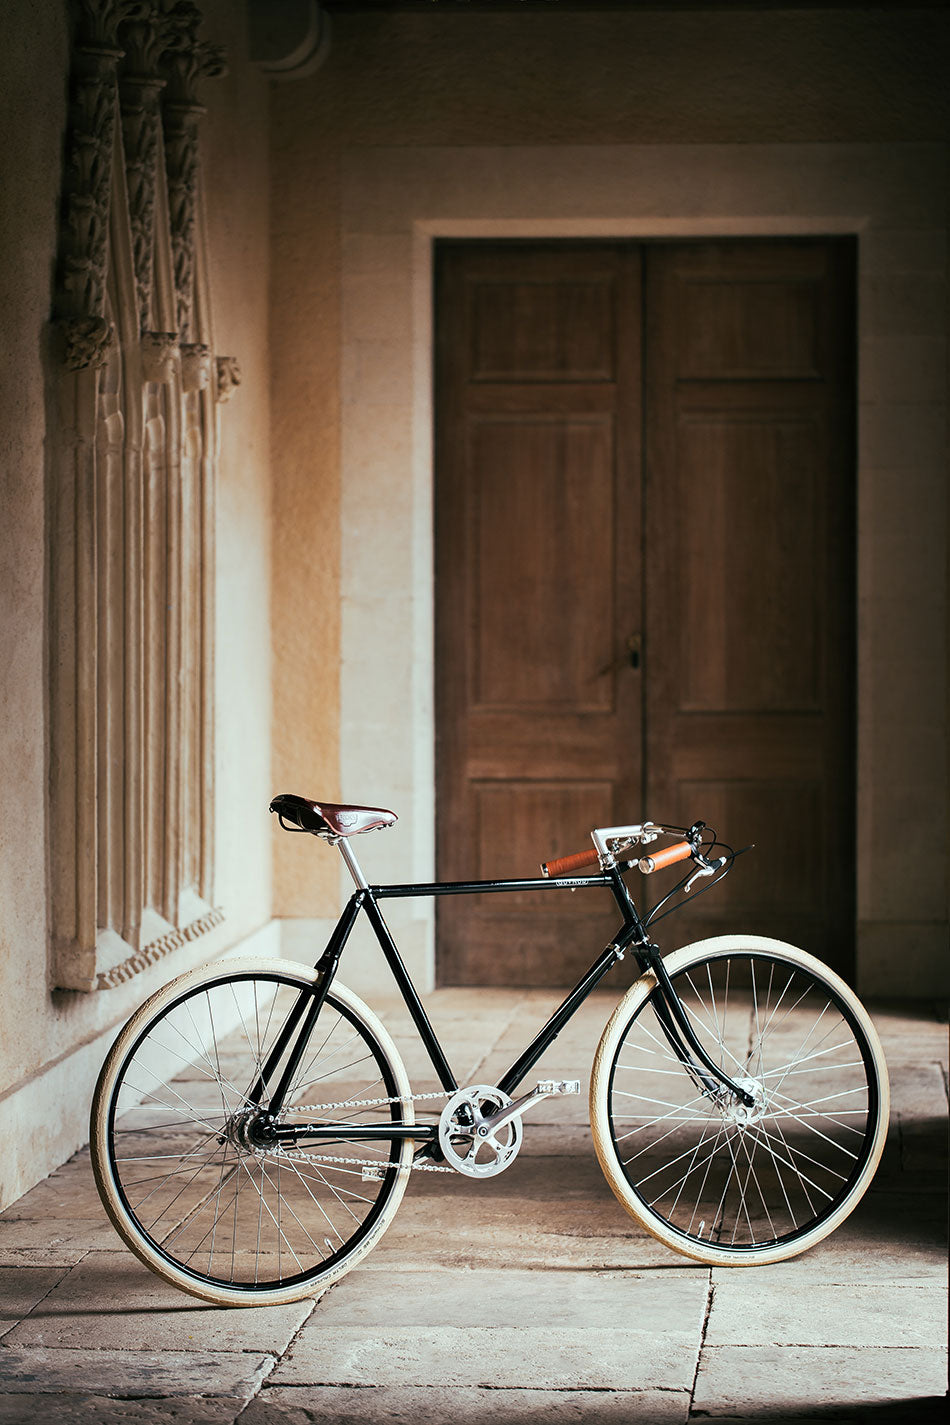 Black vintage path racer bicycle with leather saddle and cream tyres standing in the hall of an old house.